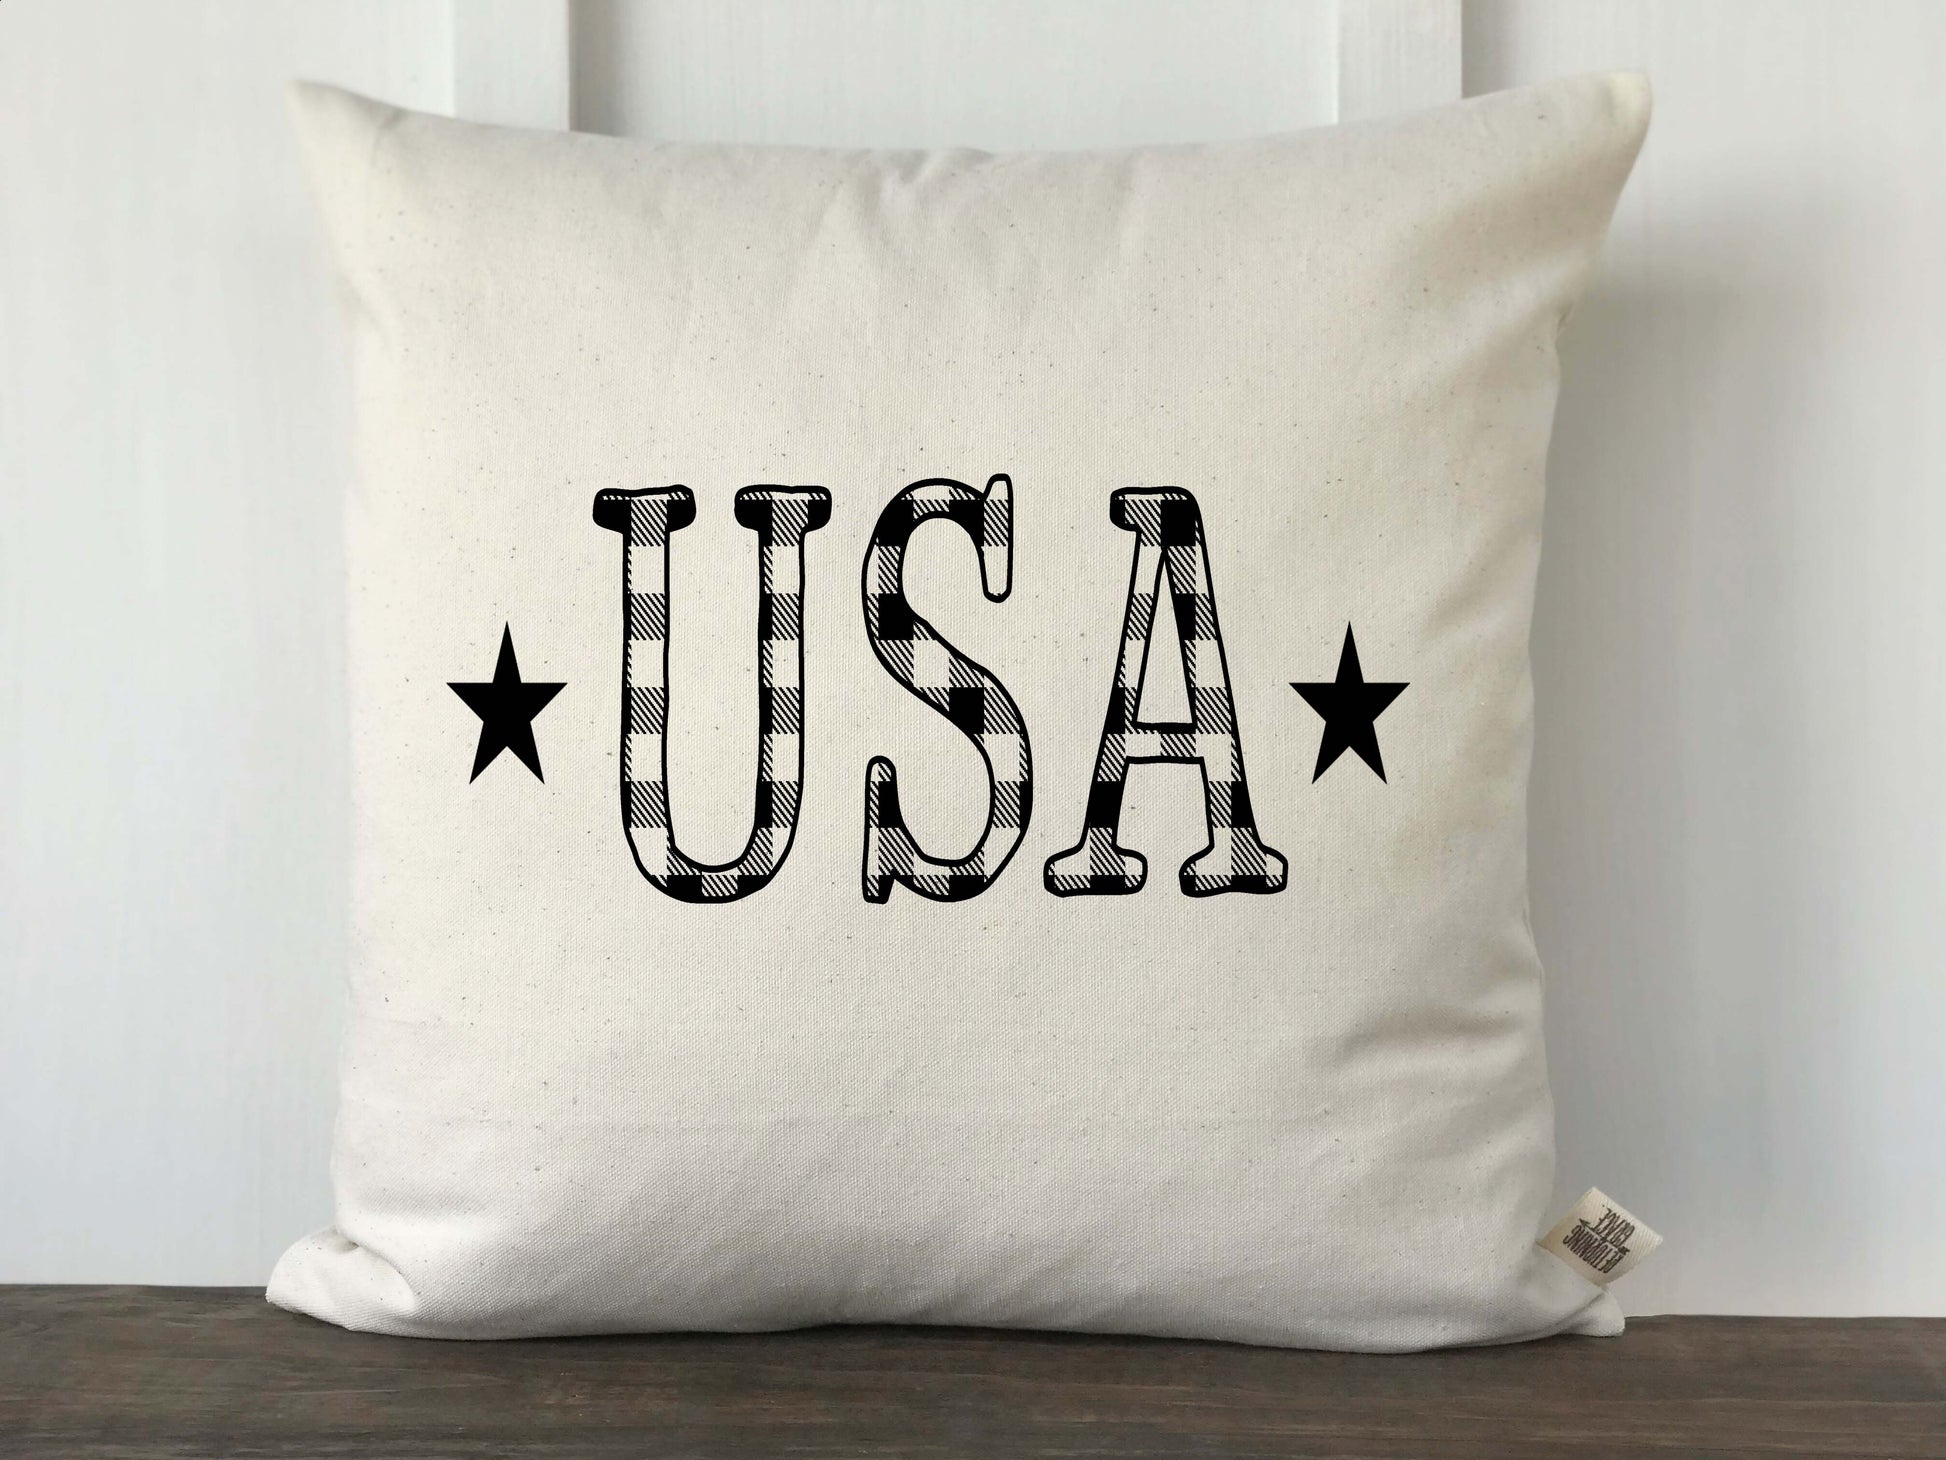 USA Letters Buffalo Check Pillow - Returning Grace Designs